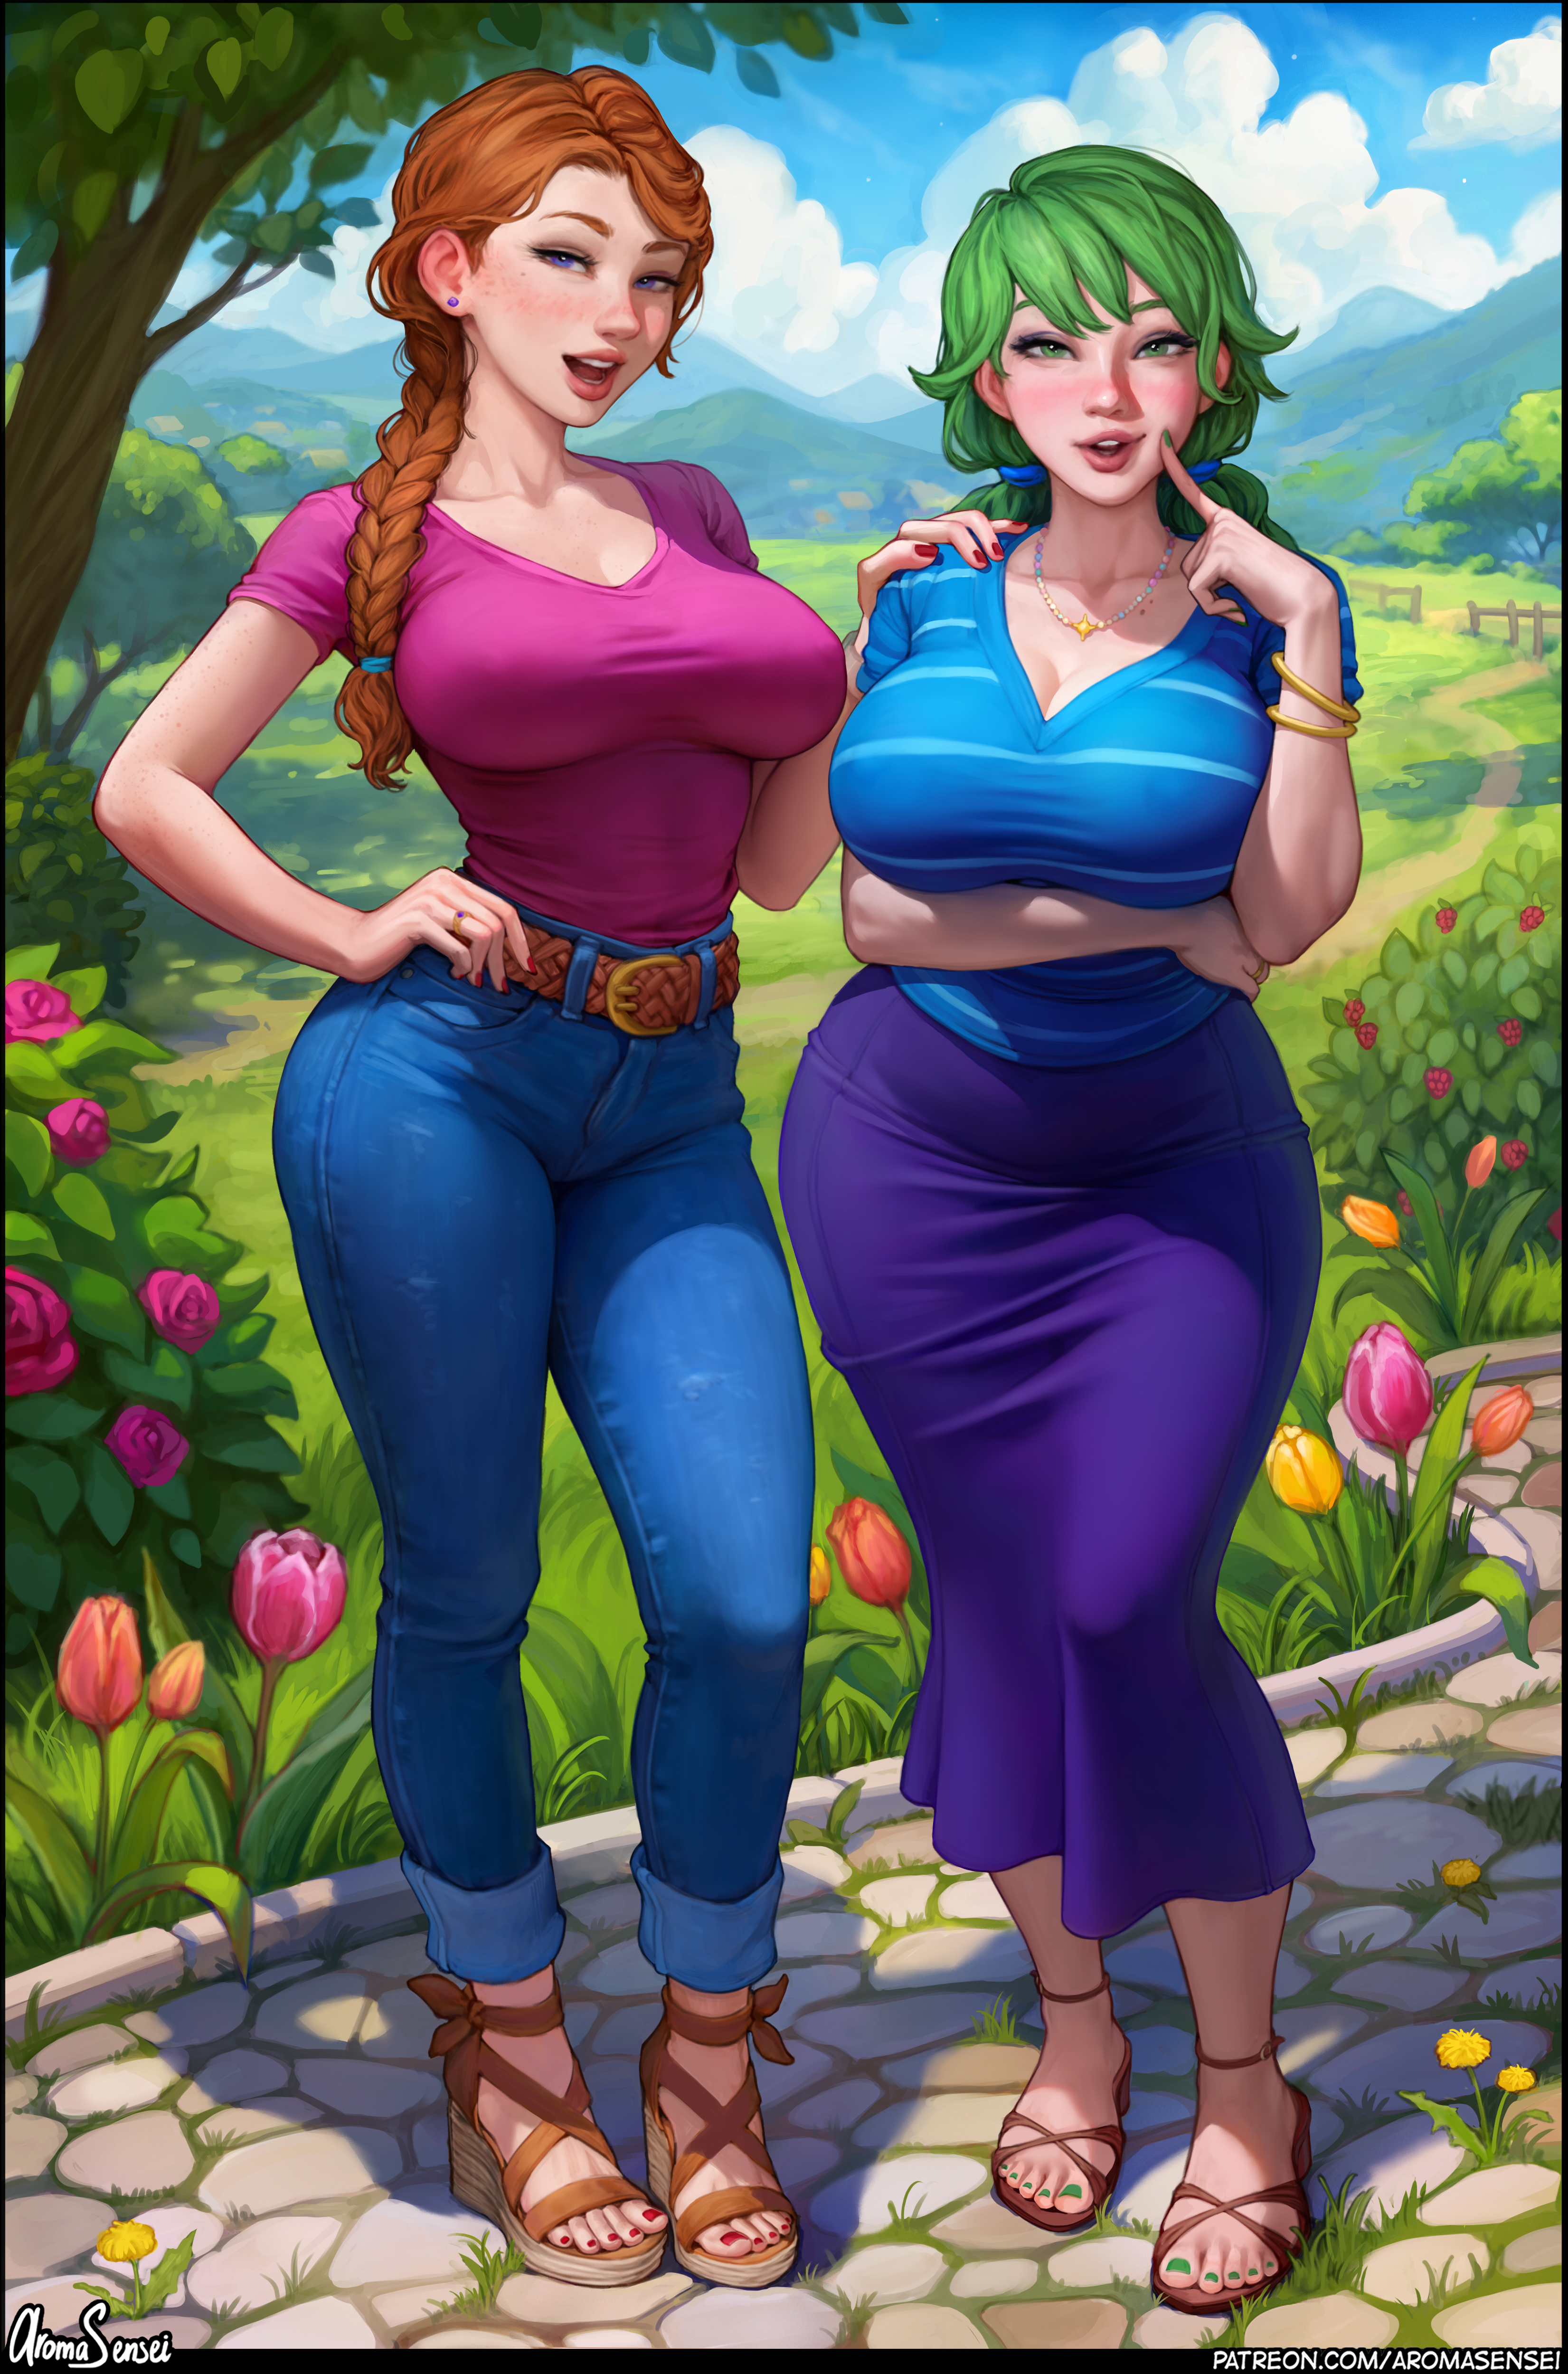 General 3302x4998 Jodi (Stardew Valley) Caroline (Stardew Valley) video game girls digital art fan art artwork drawing Aroma Sensei mature women big boobs Stardew Valley standing video games short sleeves sunlight watermarked collarbone closed mouth open mouth necklace video game characters sky leaves rose sandals painted toenails long hair painted nails cleavage bracelets